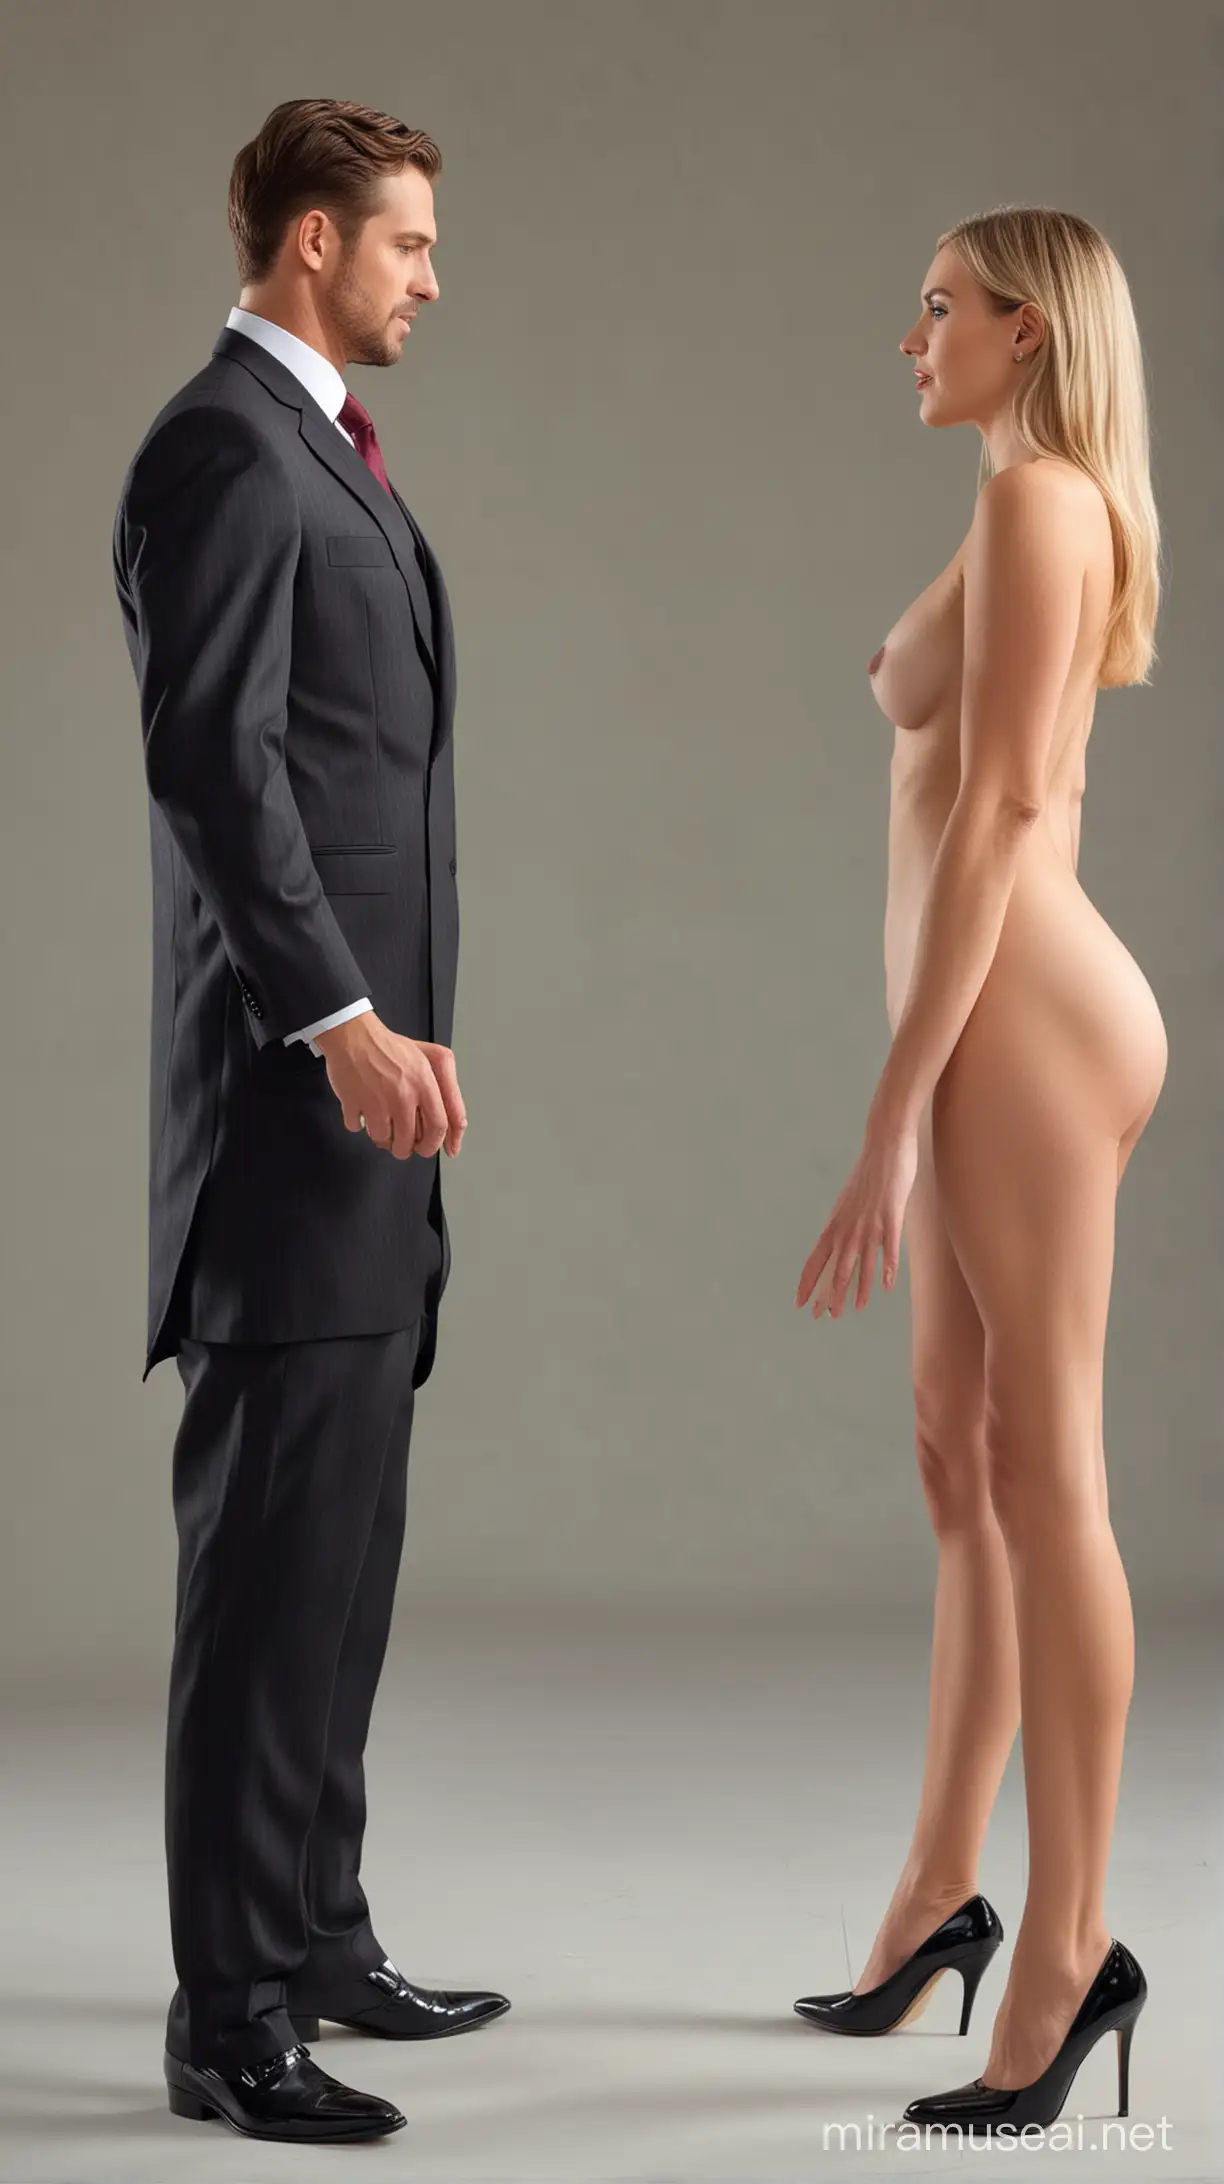 a man in a suit talking to a naked woman in high heels